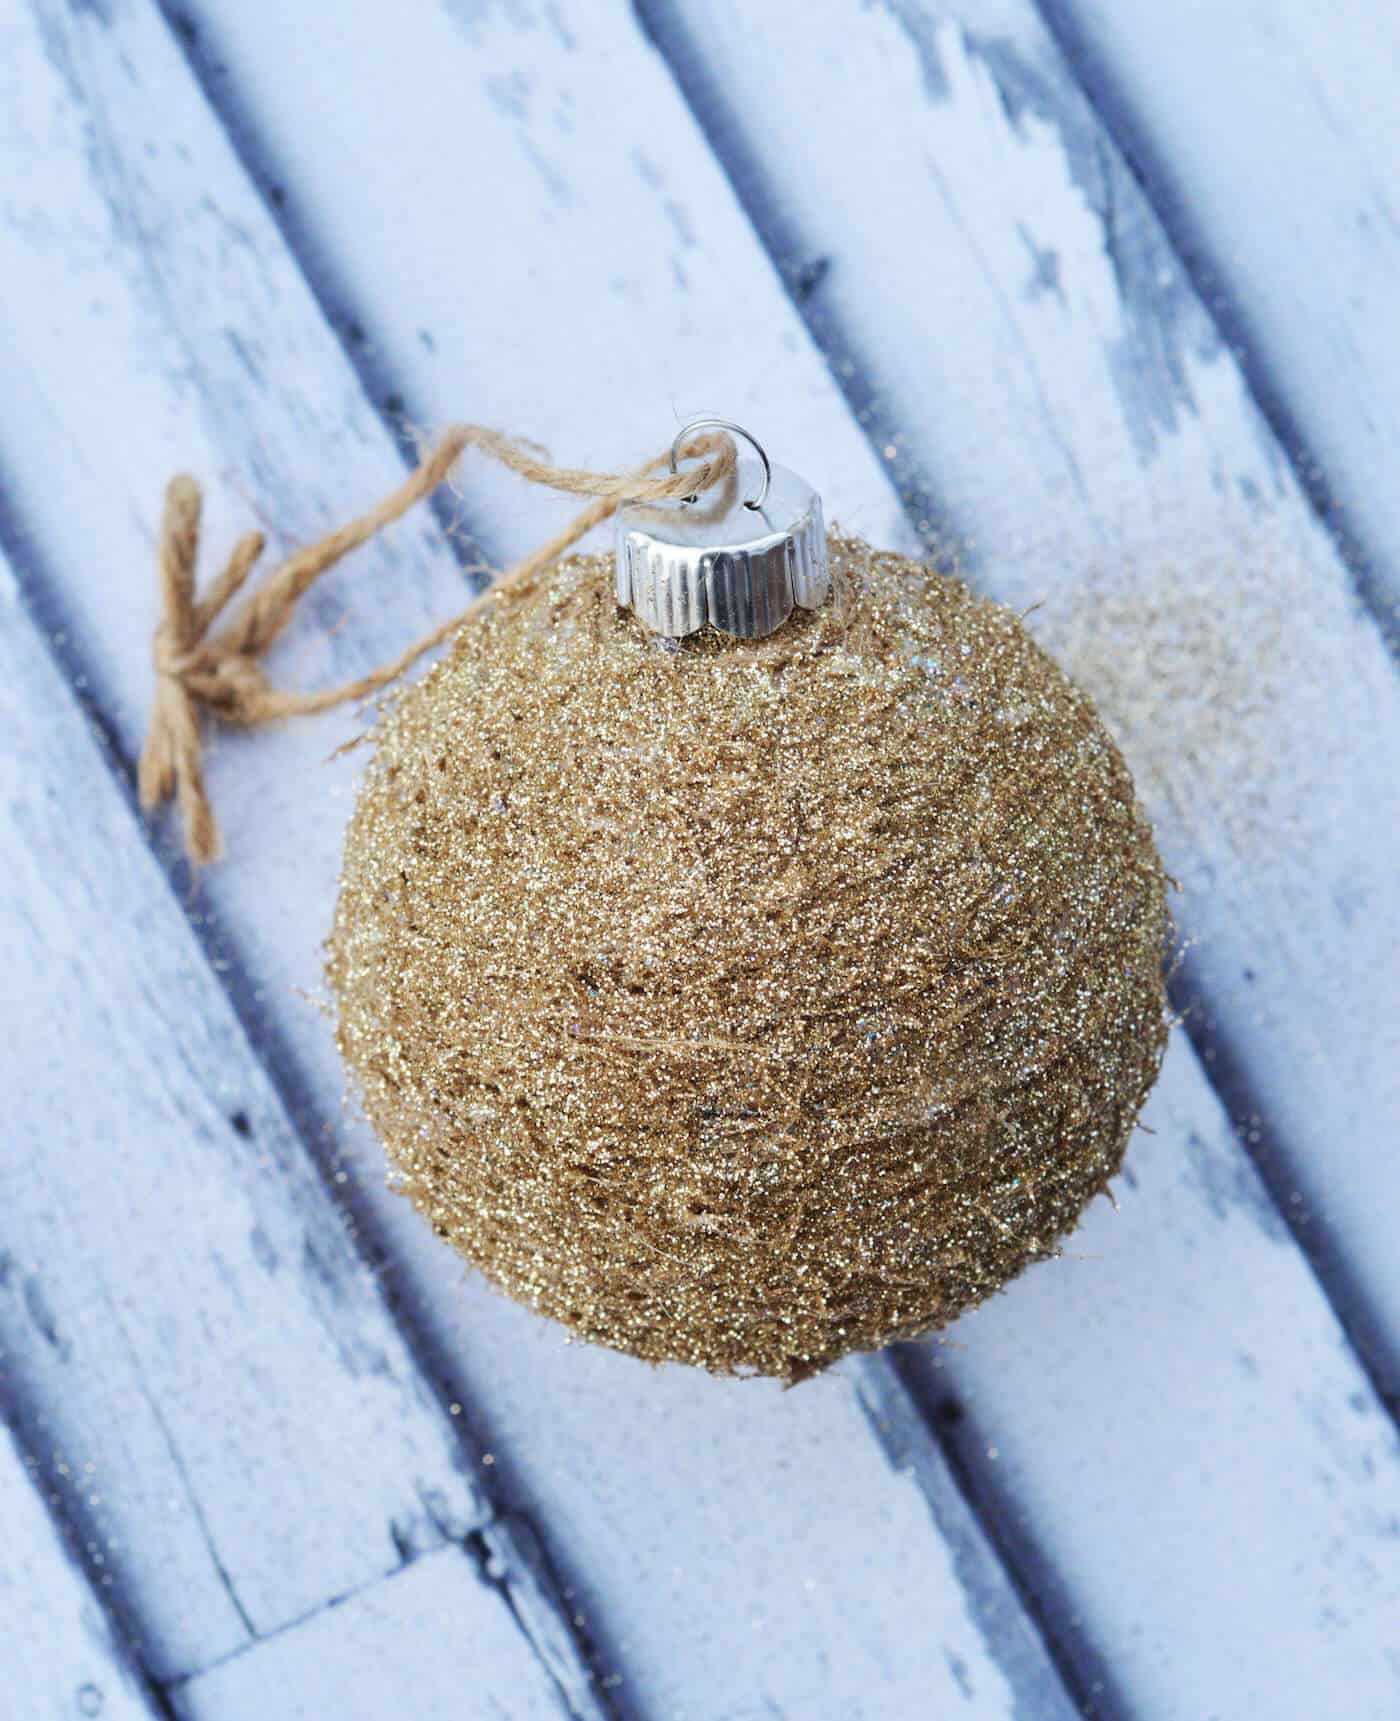 Make your own rustic glitter ornament using twine and Mod Podge! This is so easy - you'll want a whole tree of these. So pretty!